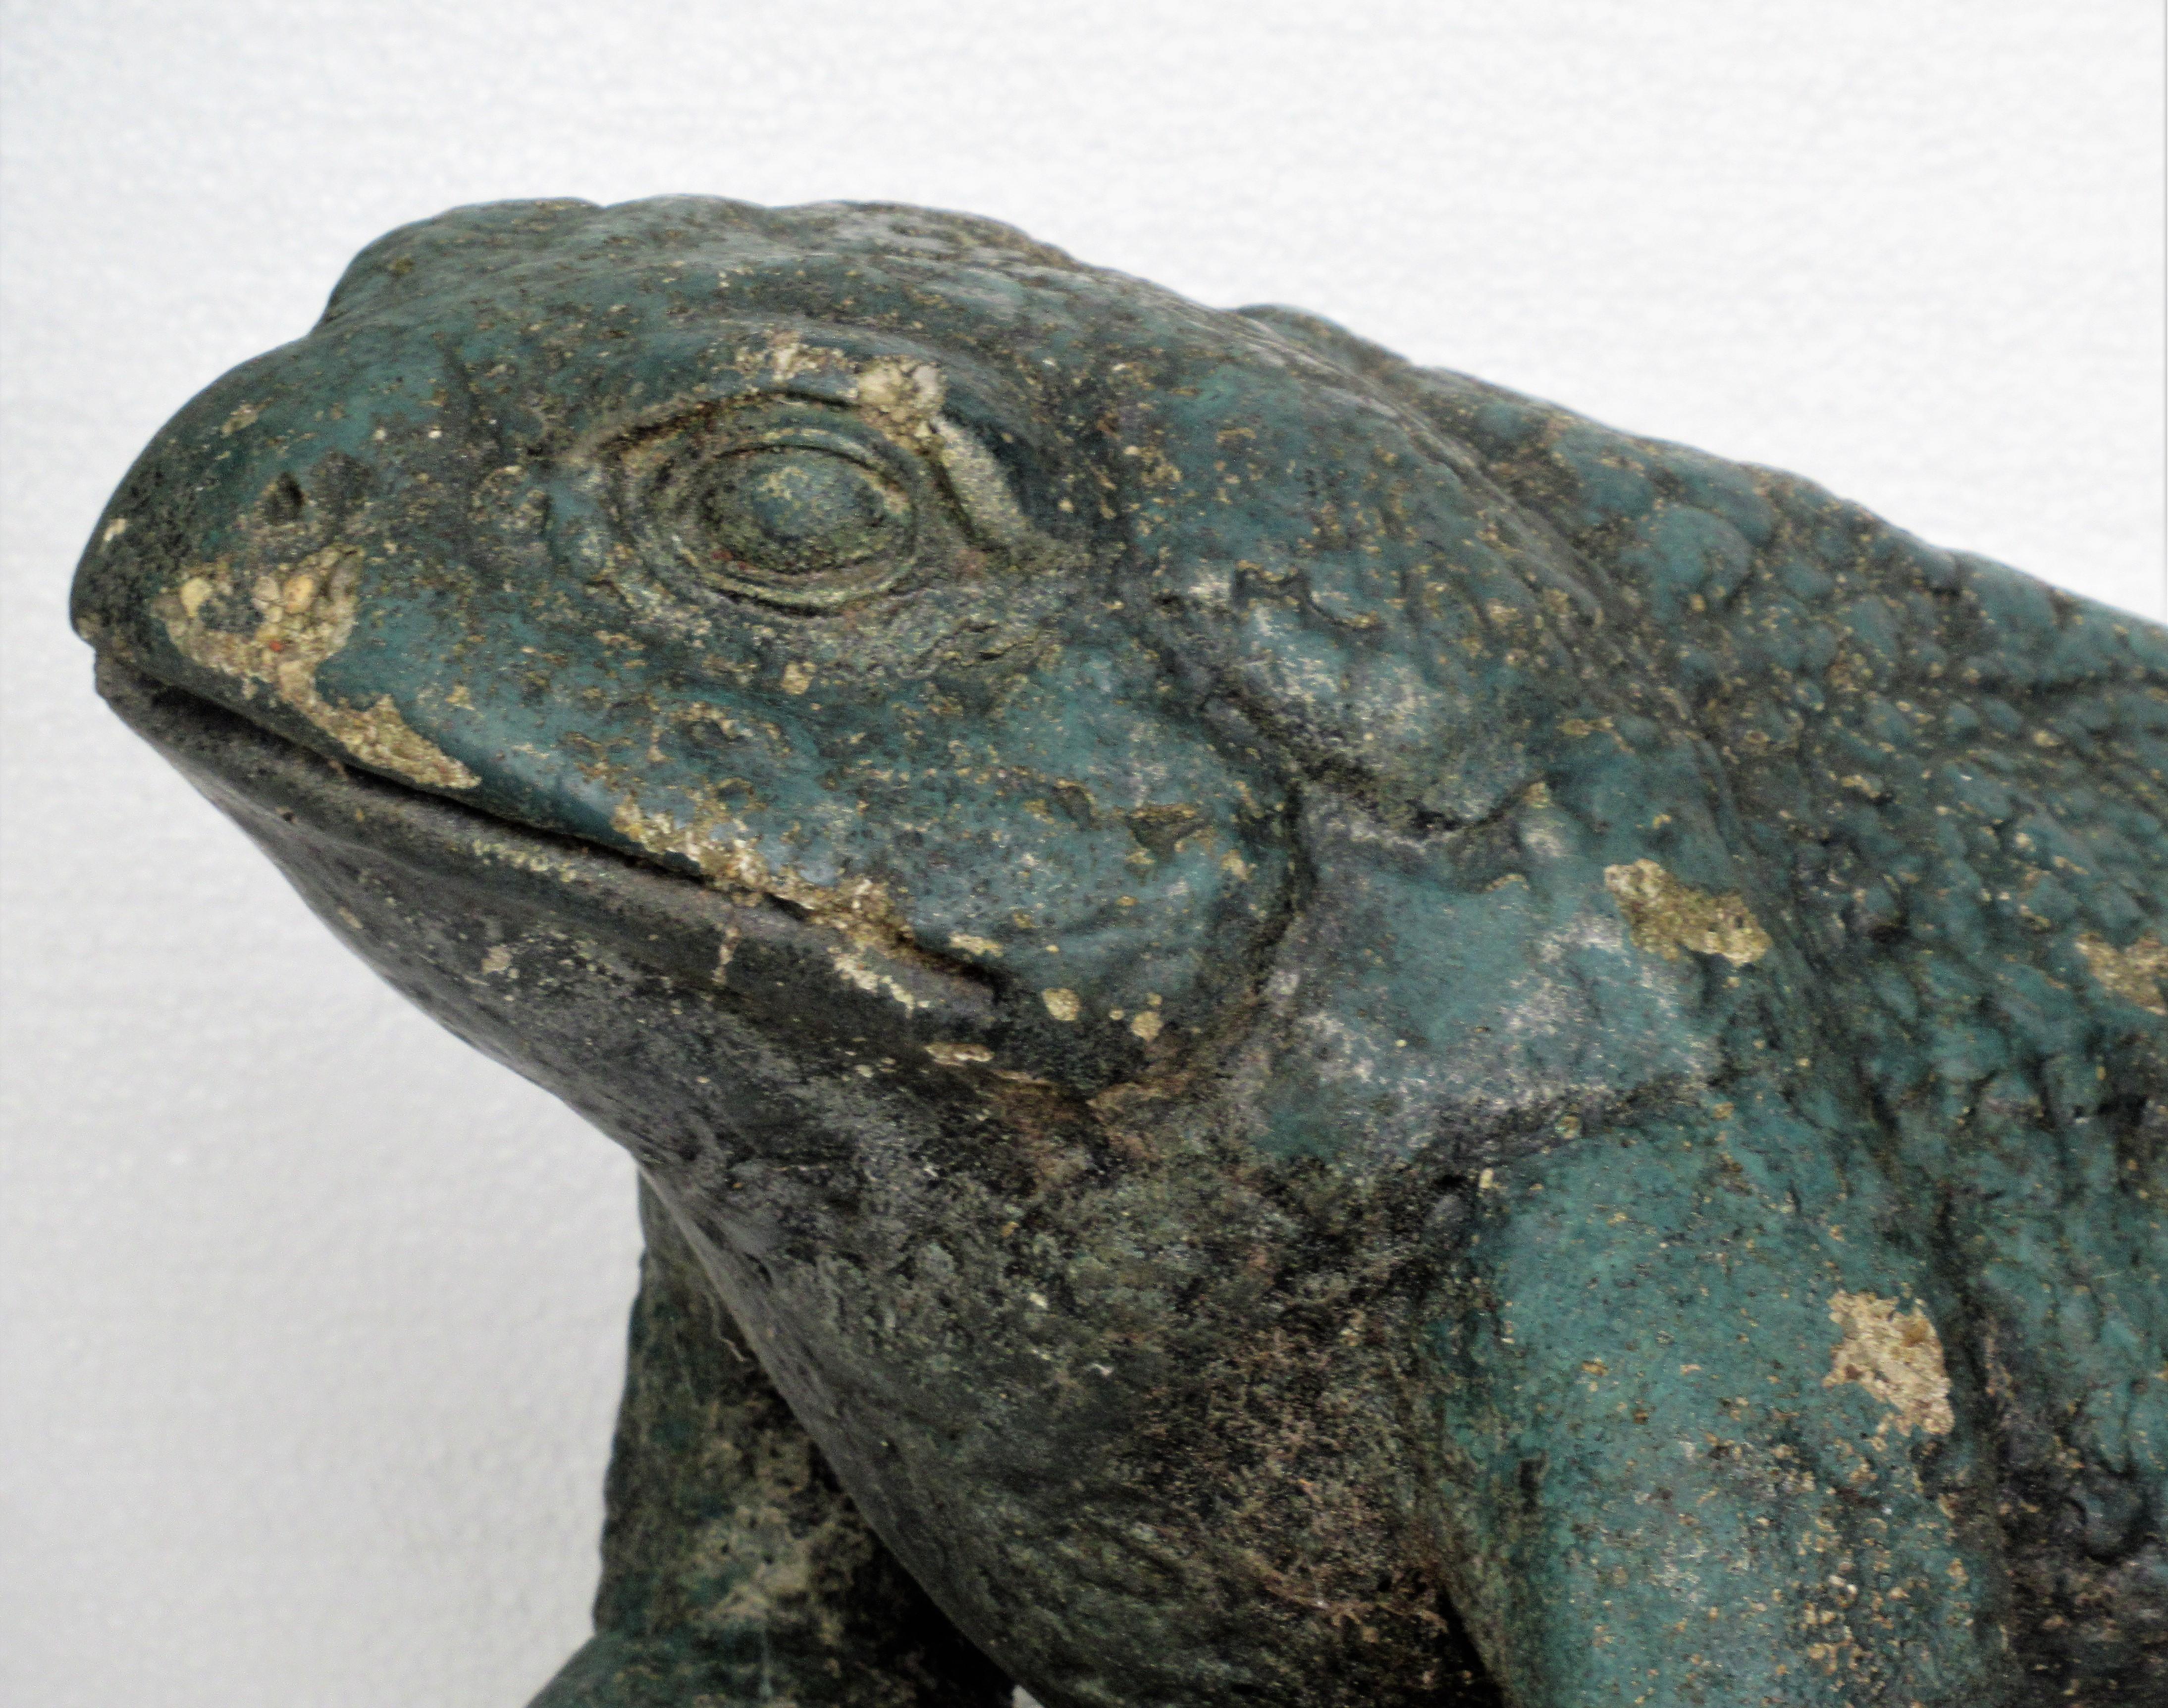  Old Painted Stone Garden Toads 14